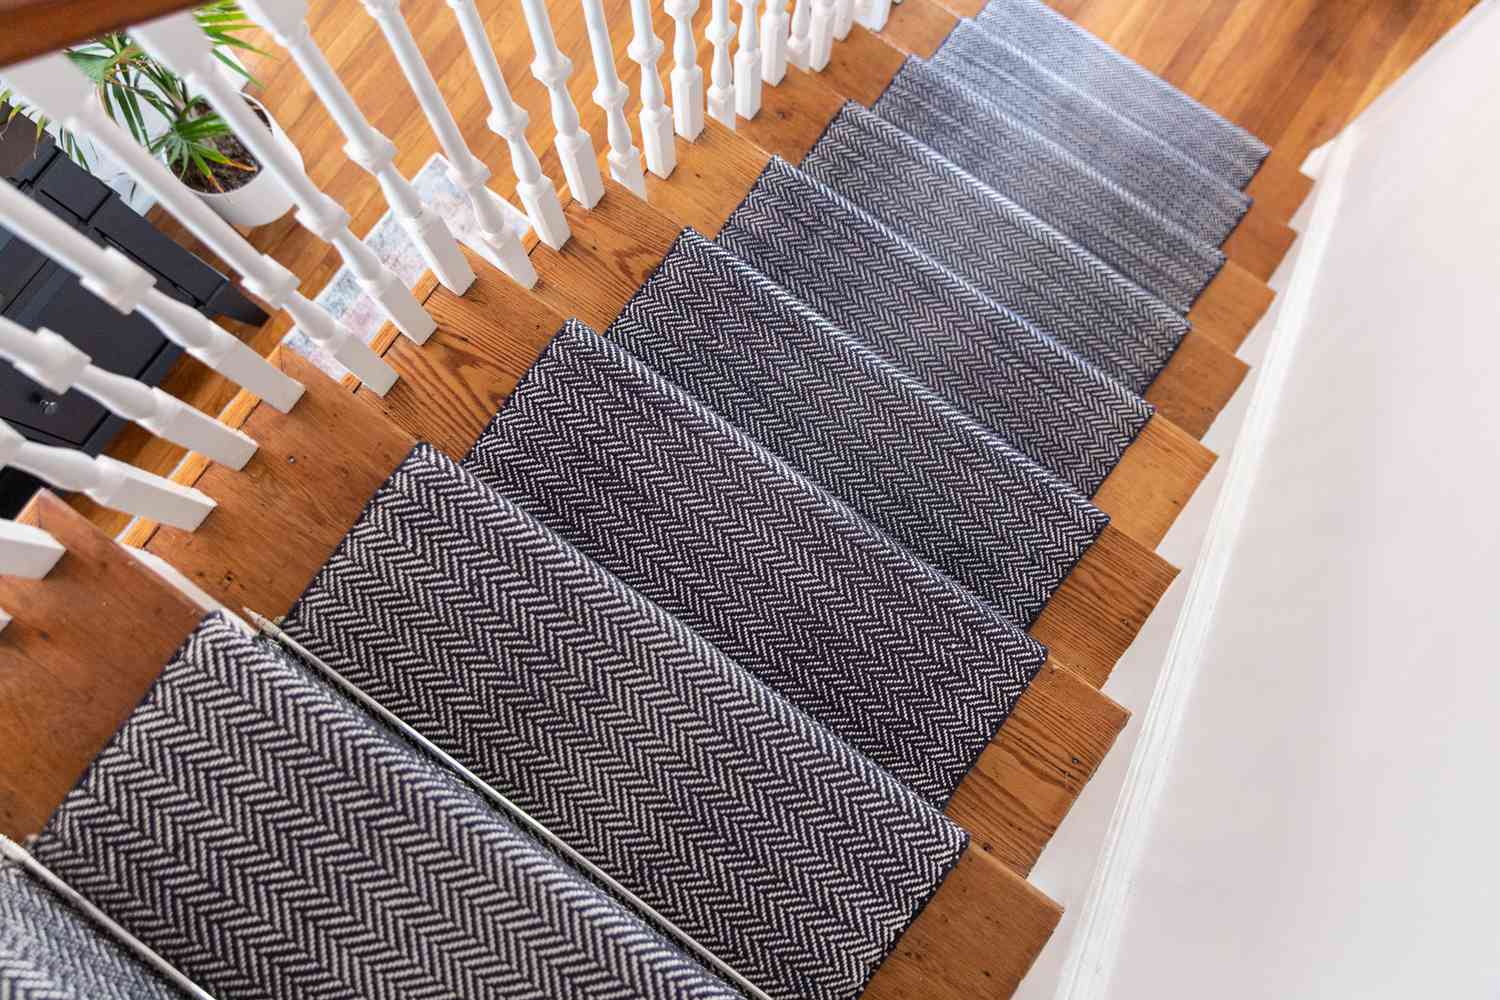 How To Cover Wooden Stairs